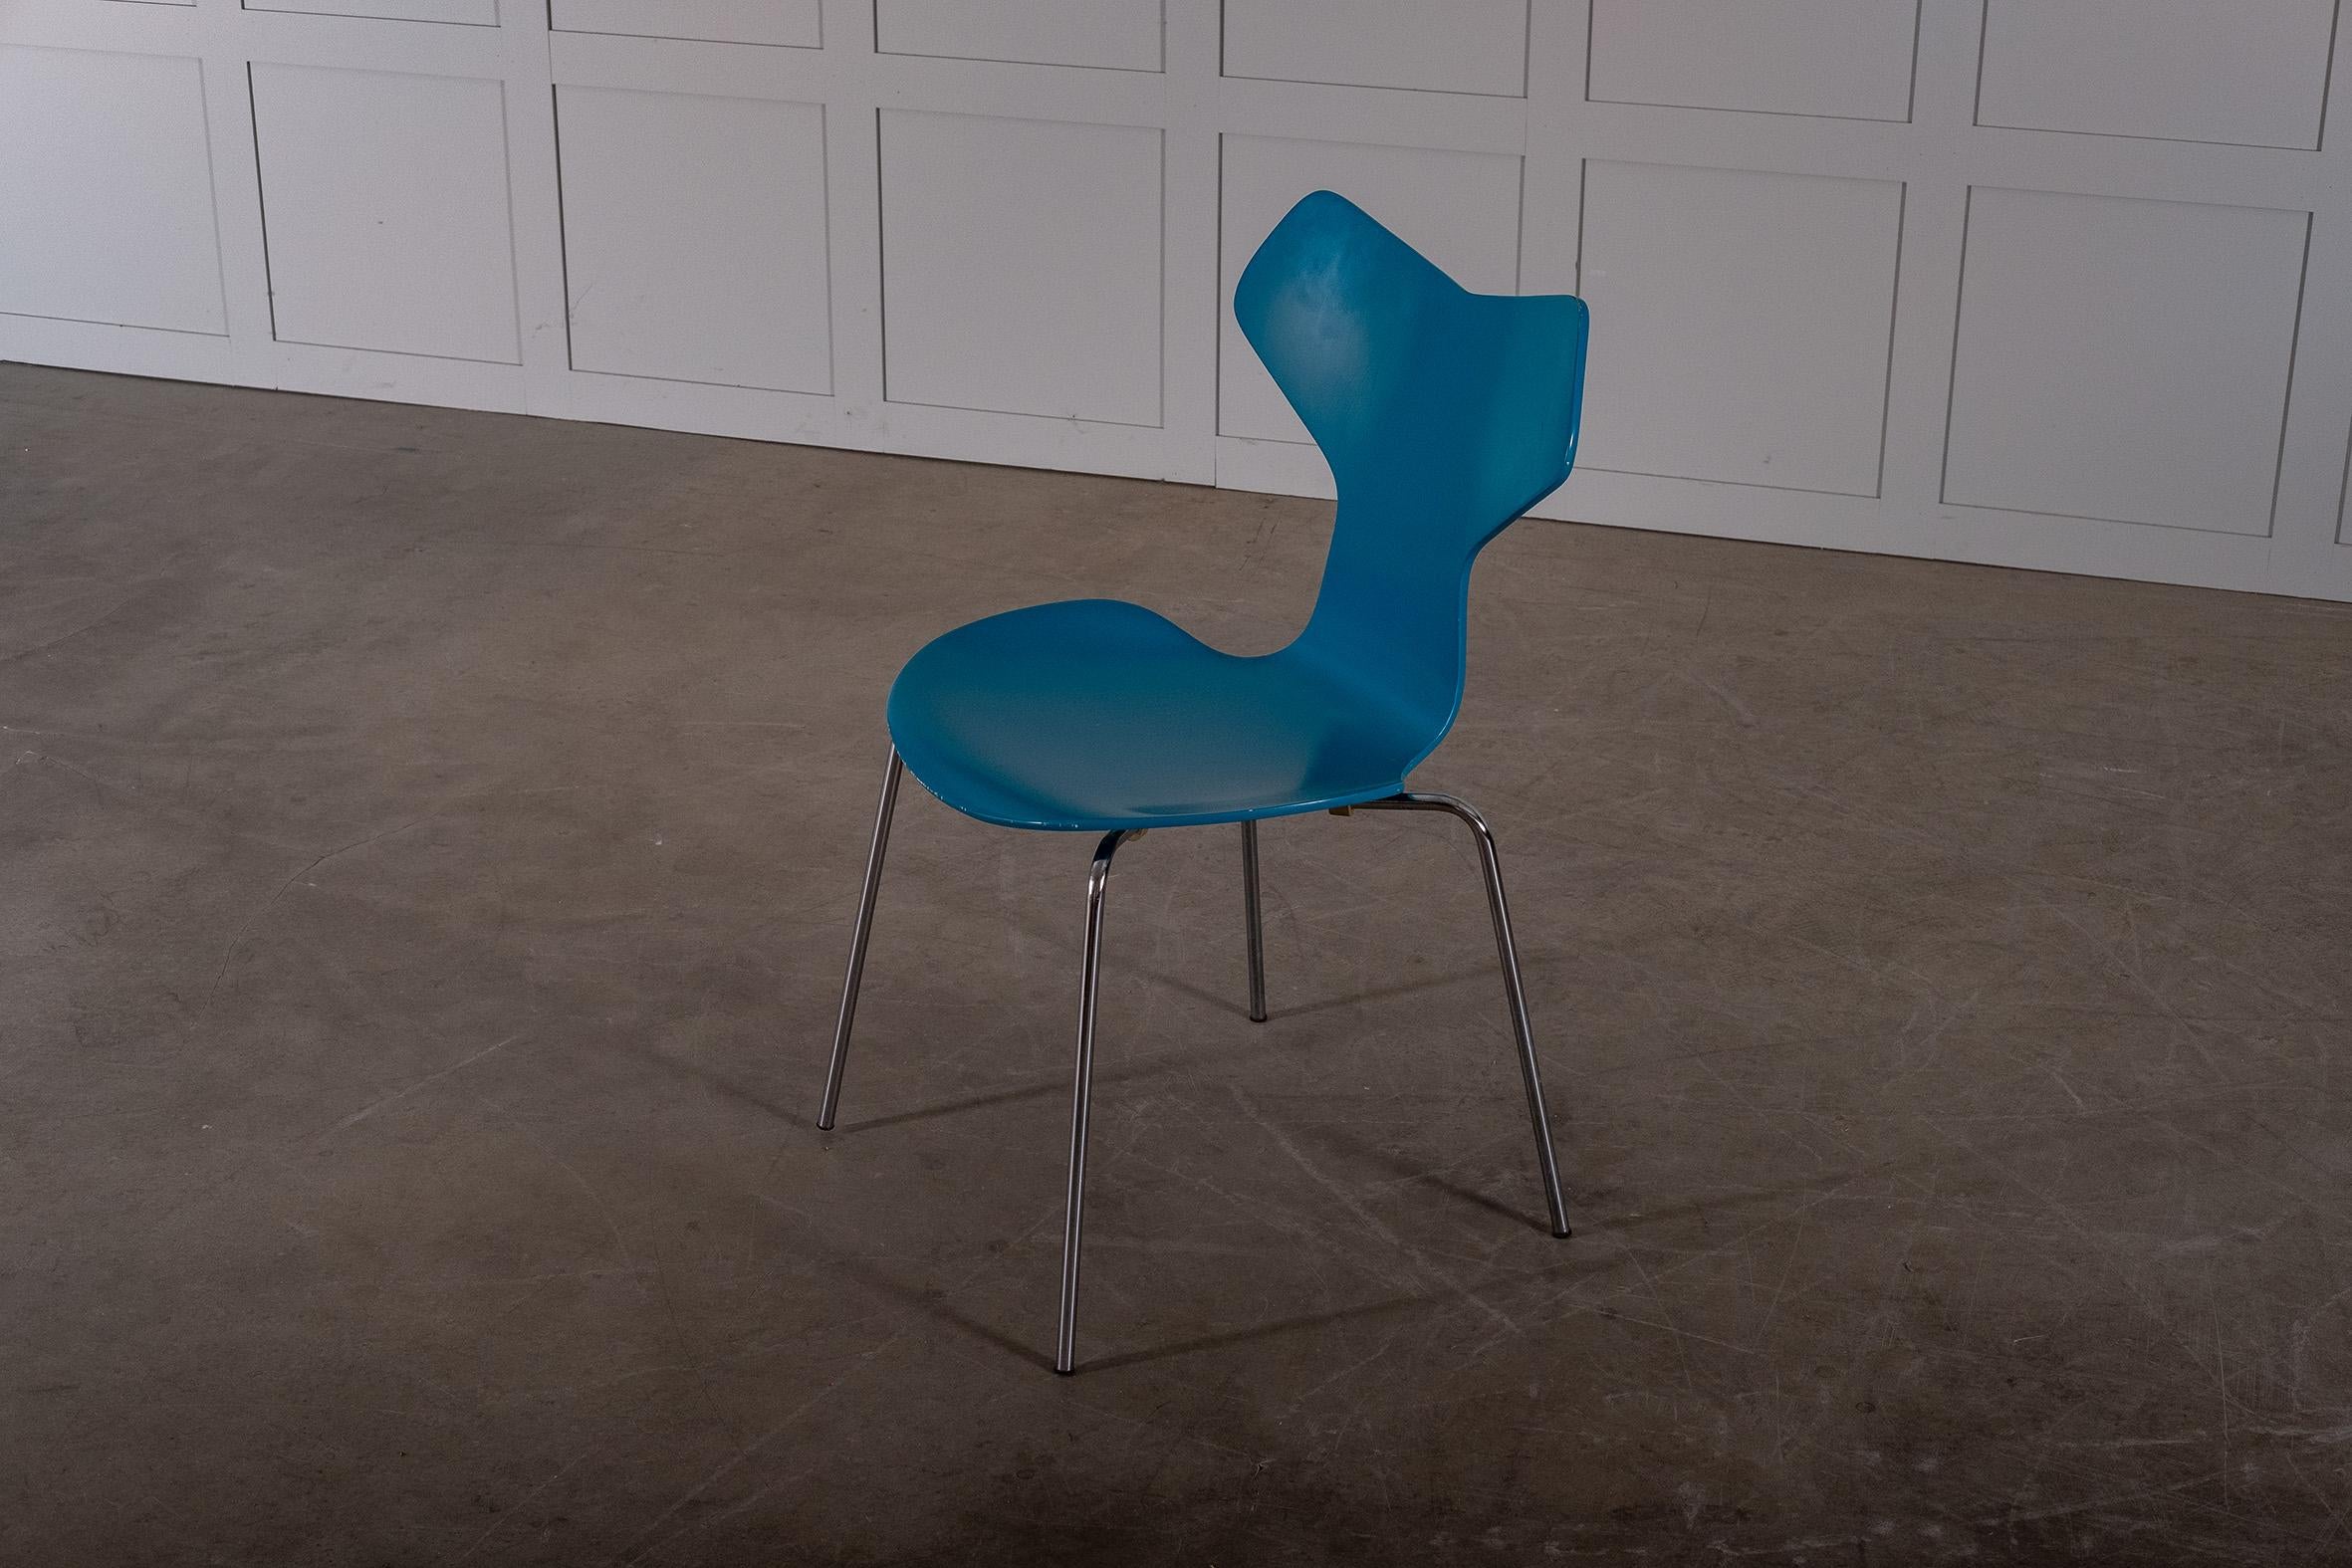 The Grand Prix chair was introduced by Fritz Hansen at the Designers Spring Exhibition at the Danish Museum of Art & Design in Copenhagen, in 1957.